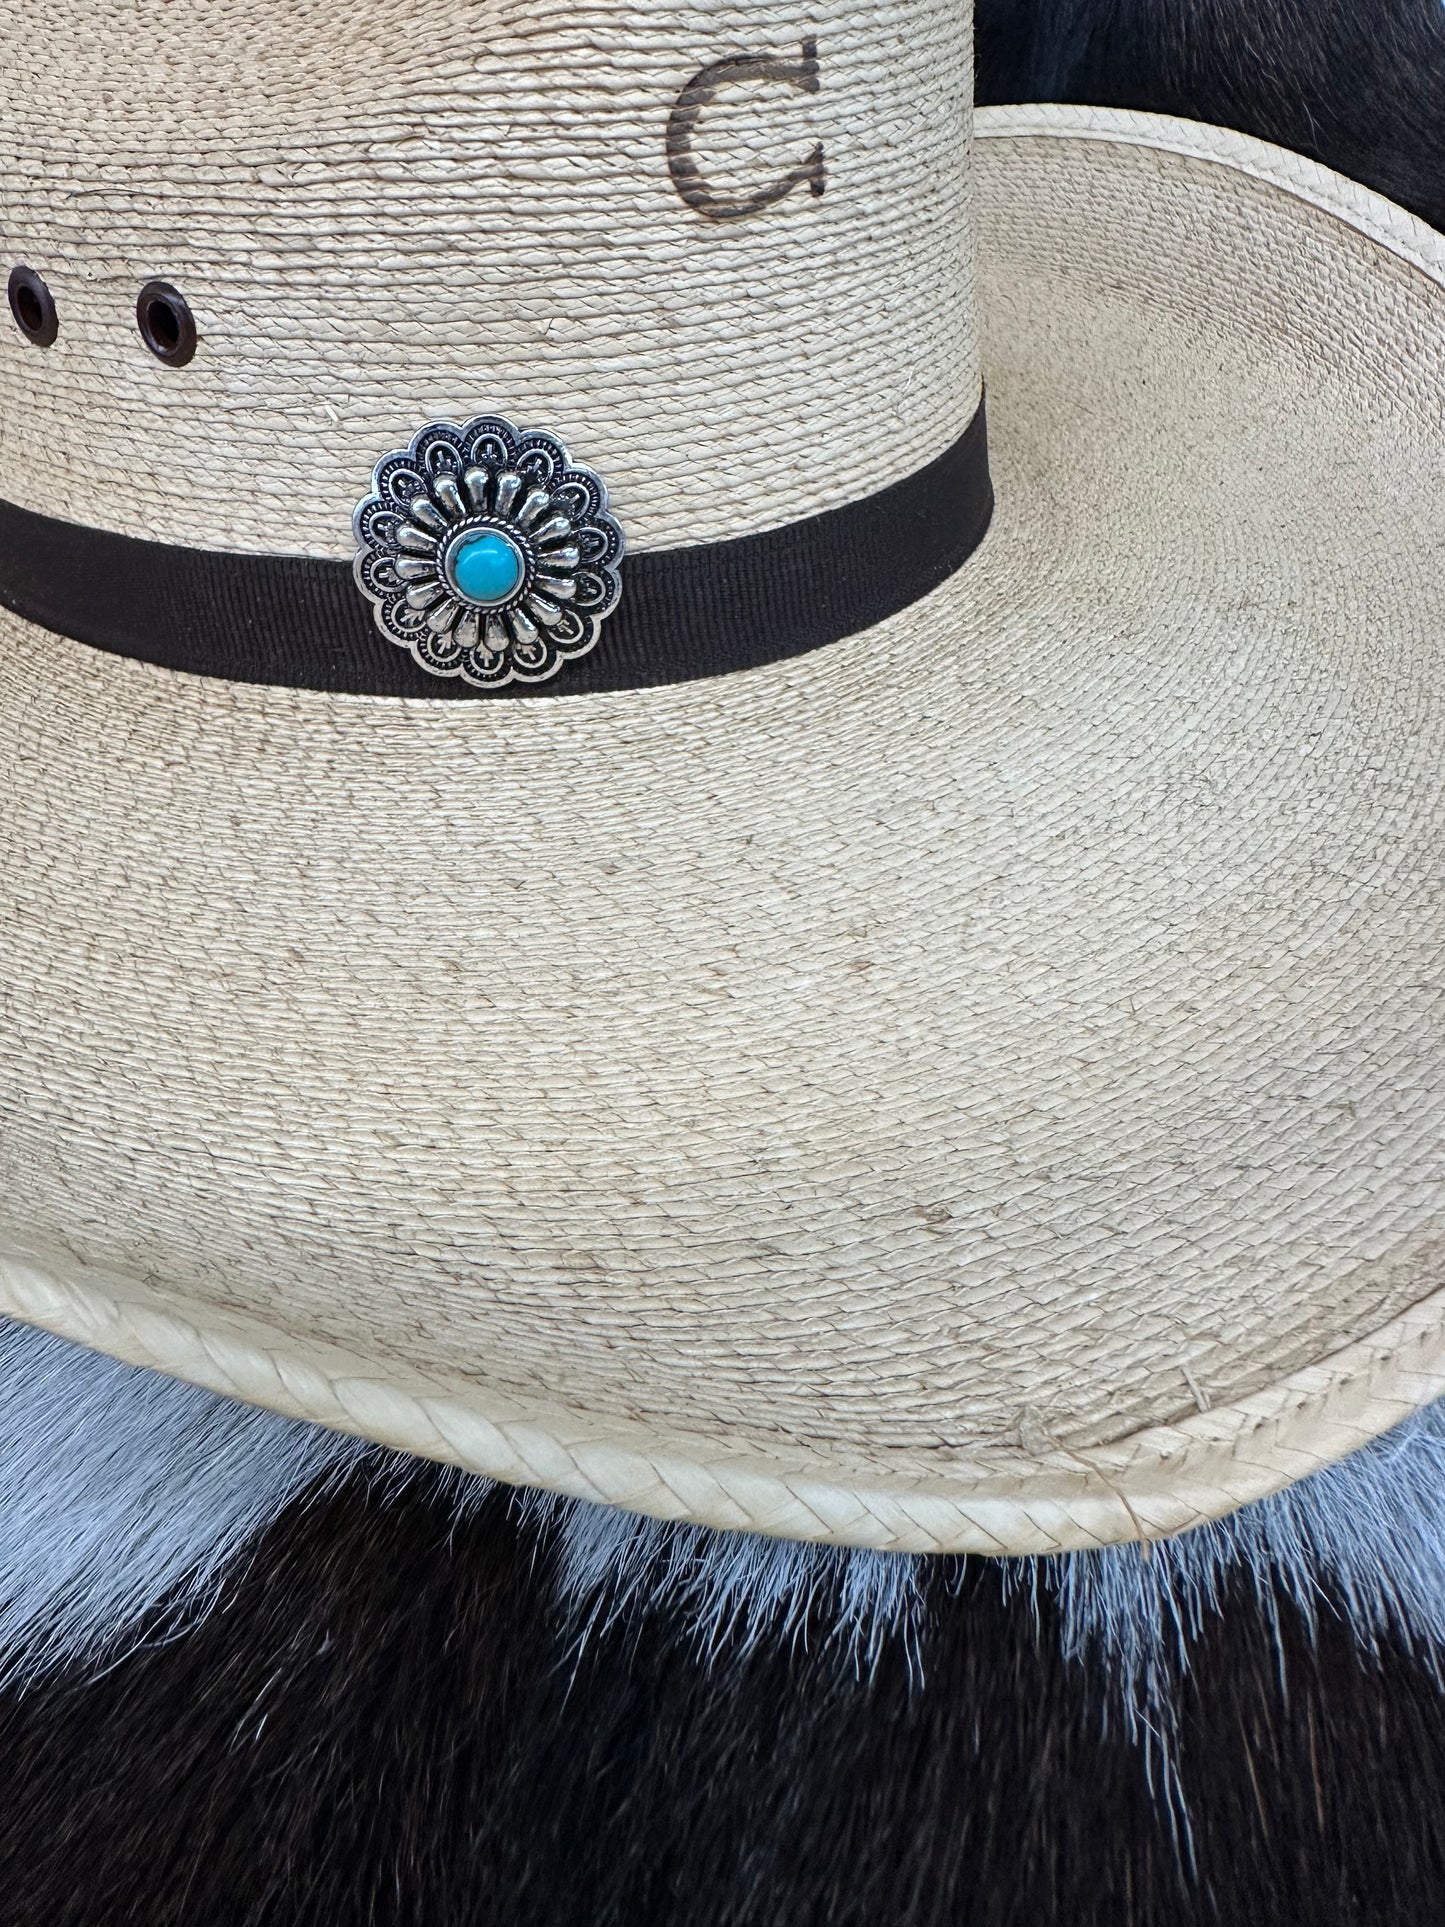 The Turquoise for One Hat Pin